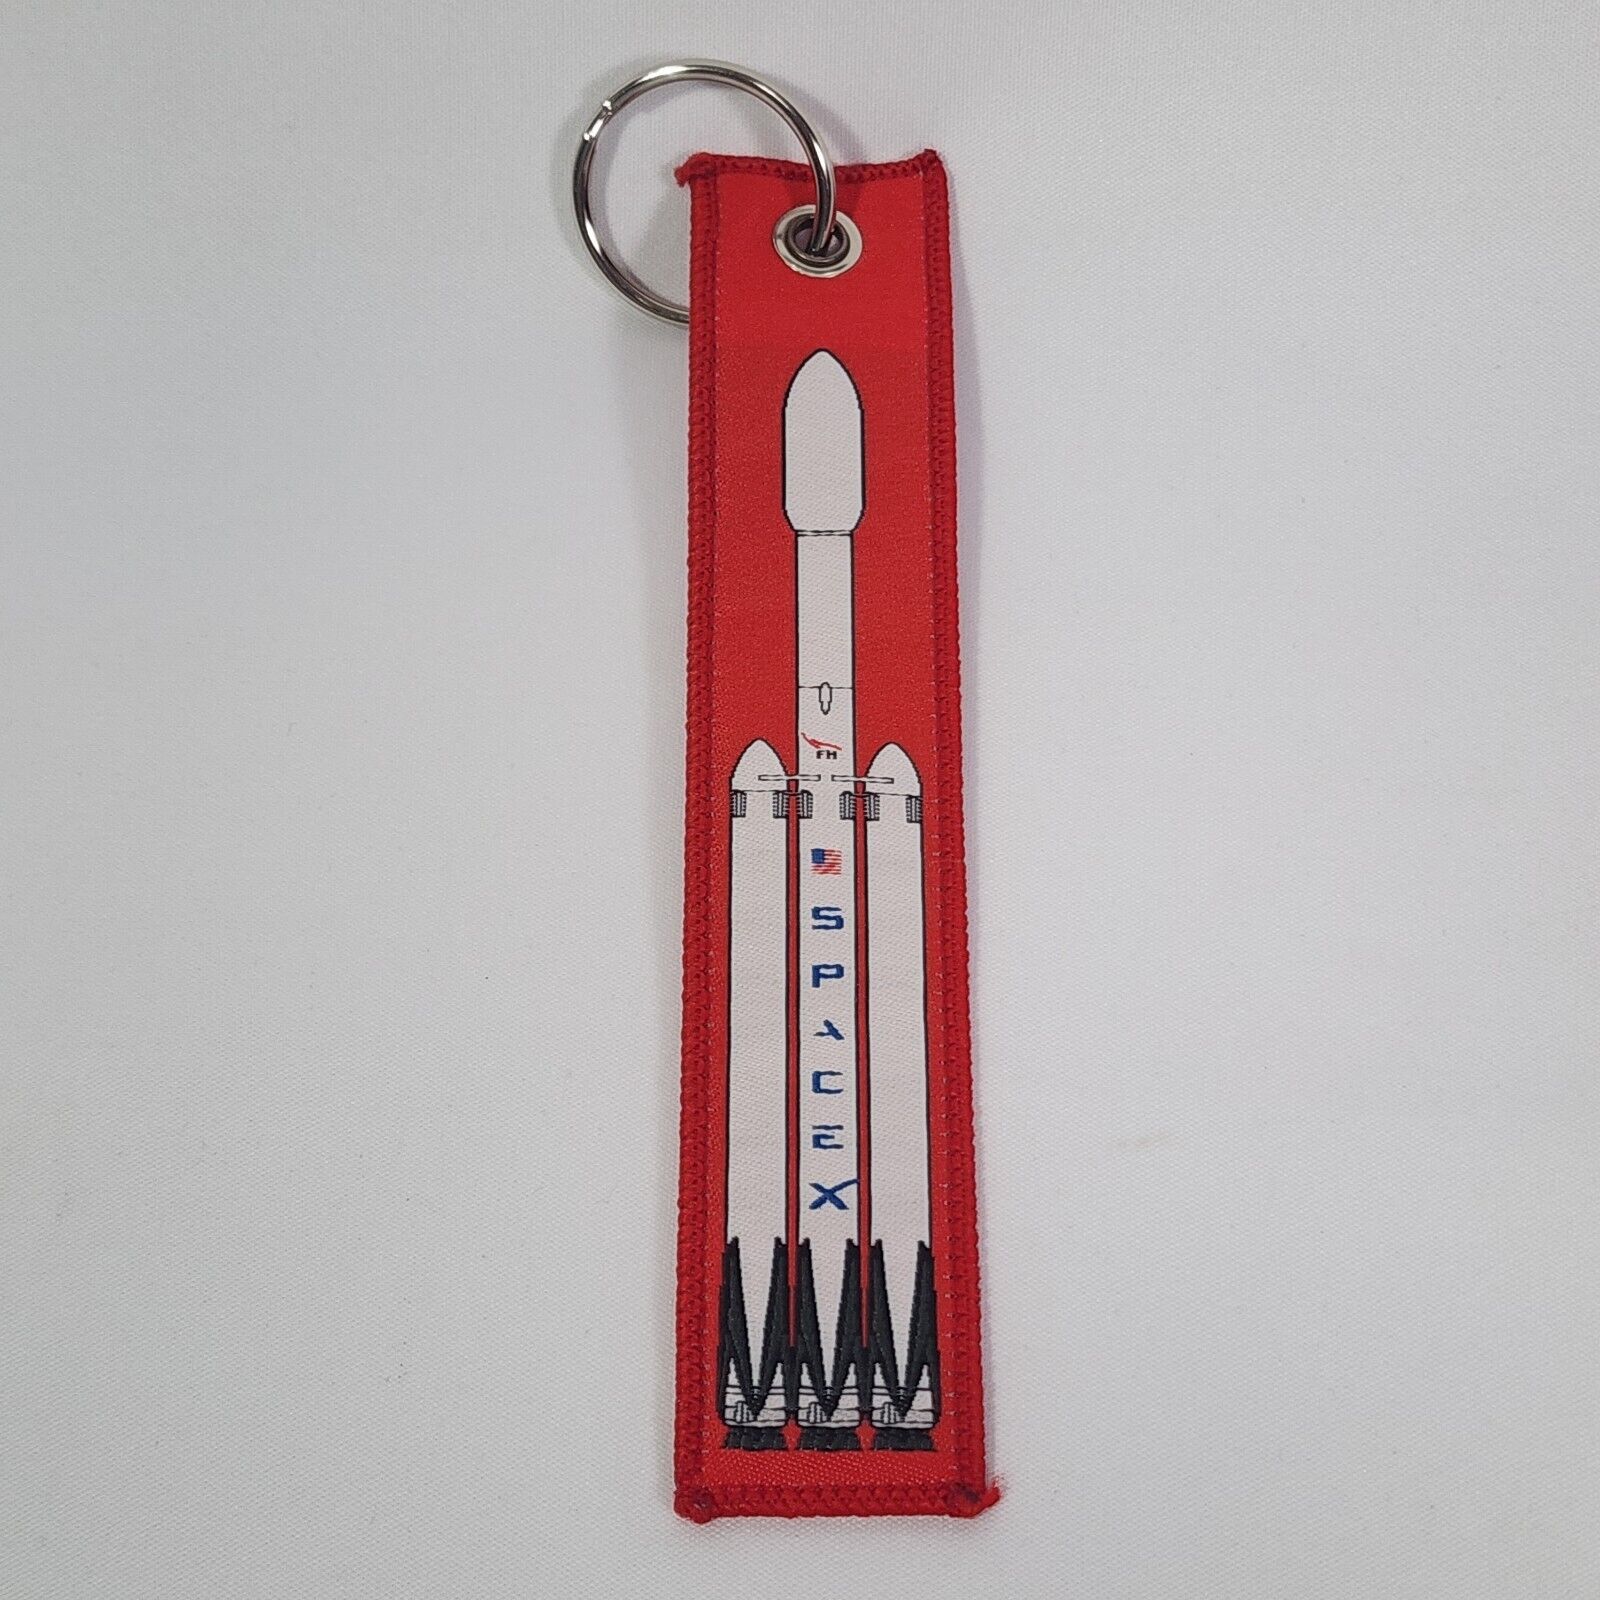 SPACEX Falcon Heavy Remove Before Flight KEYCHAIN Elon Musk SPACE X NASA Space